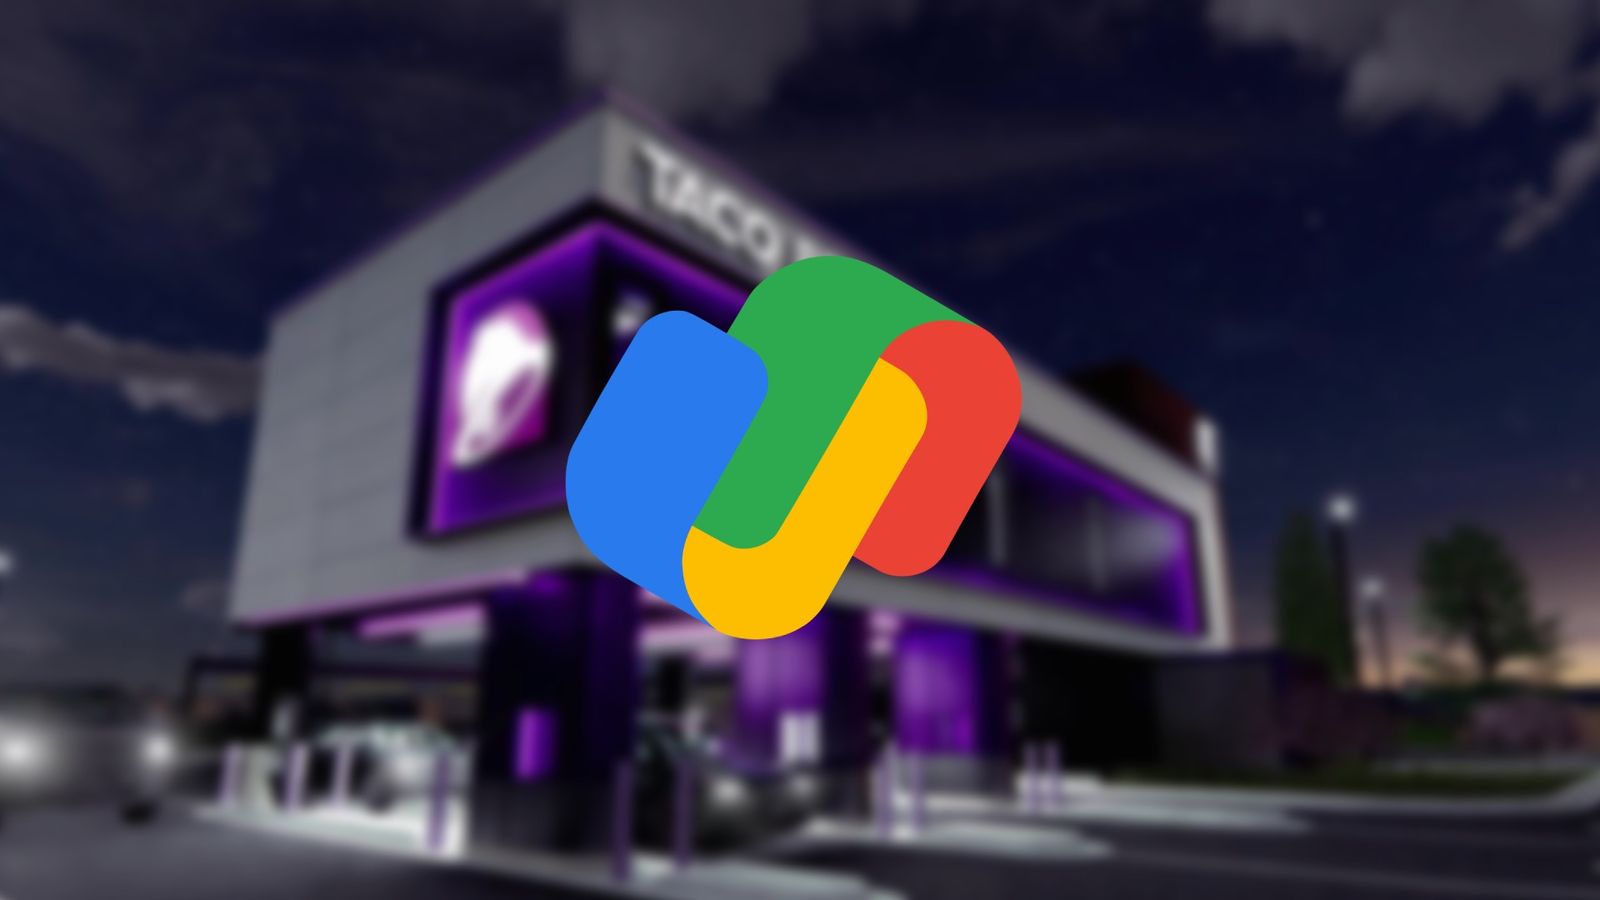 Does Taco Bell take Google Pay? - An image of the logo of GPay with a Taco Bell restaurant in the background